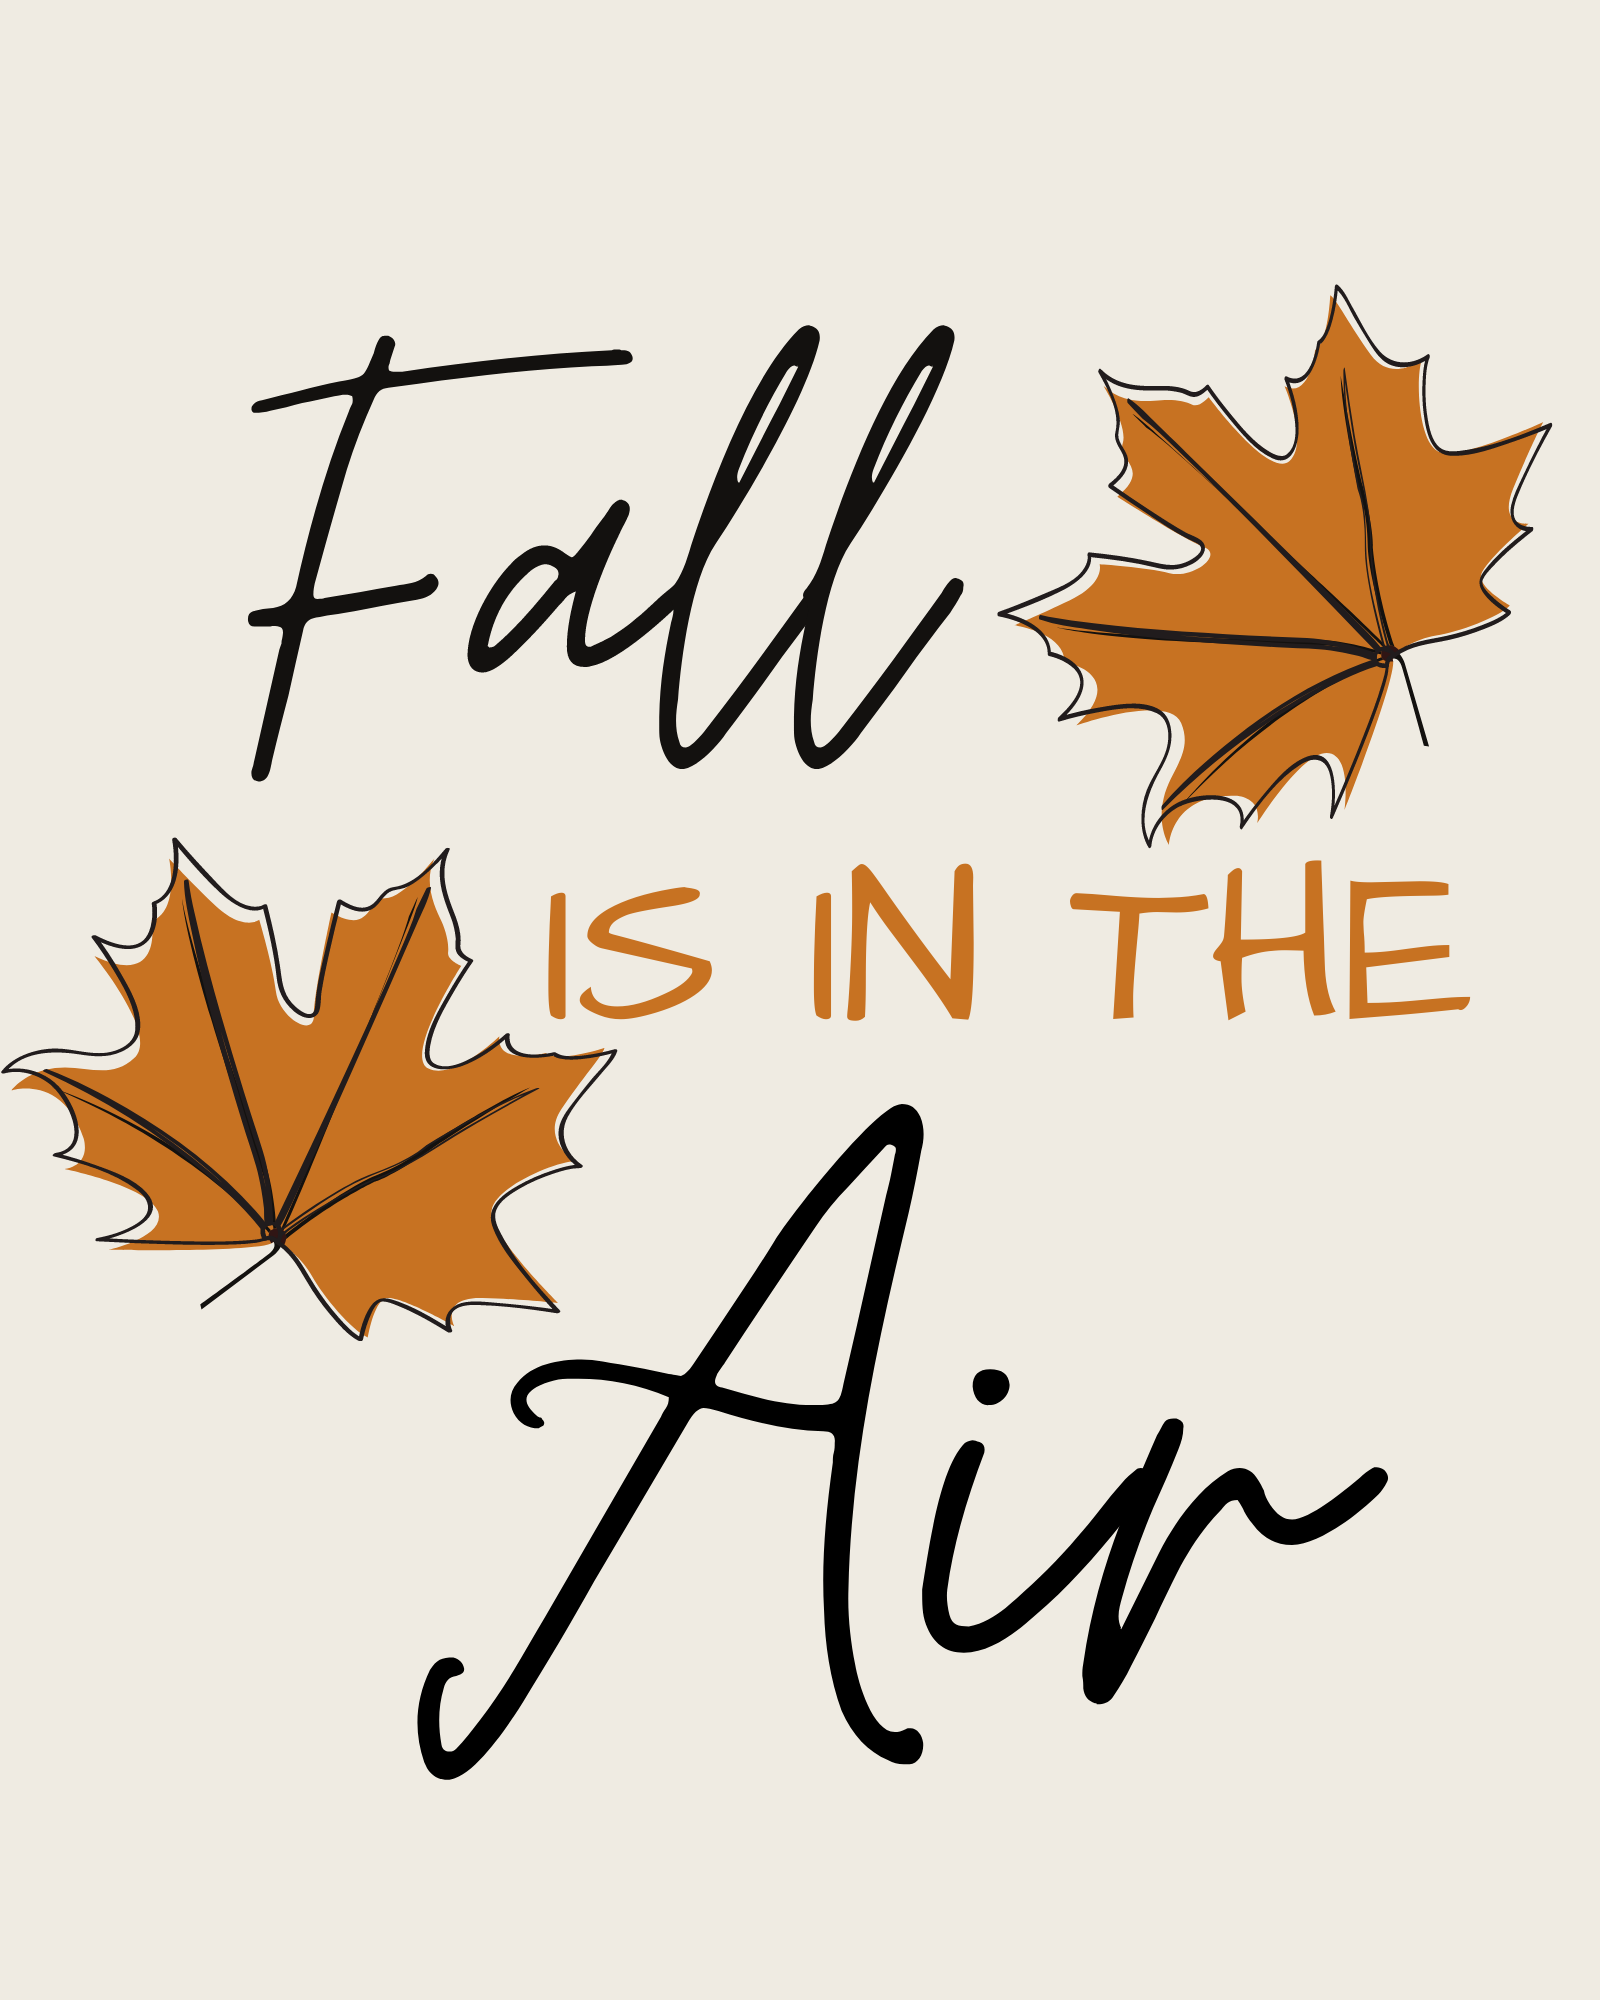 10 Free Fall Printables For Fall Decorating Prudent Penny Pincher